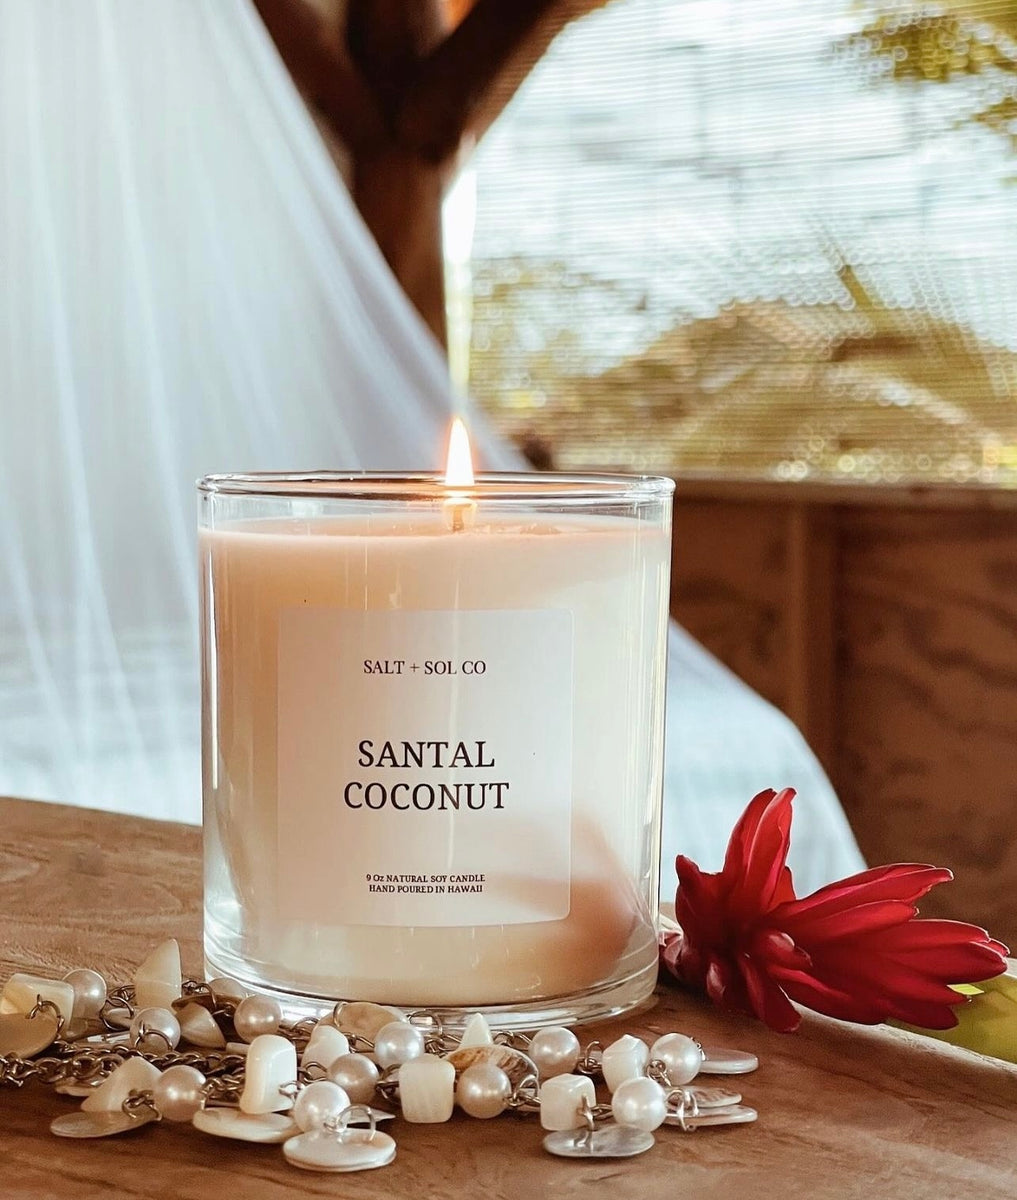 Shop santal coconut scented candles made in Hawaii at salt and sol co candle company